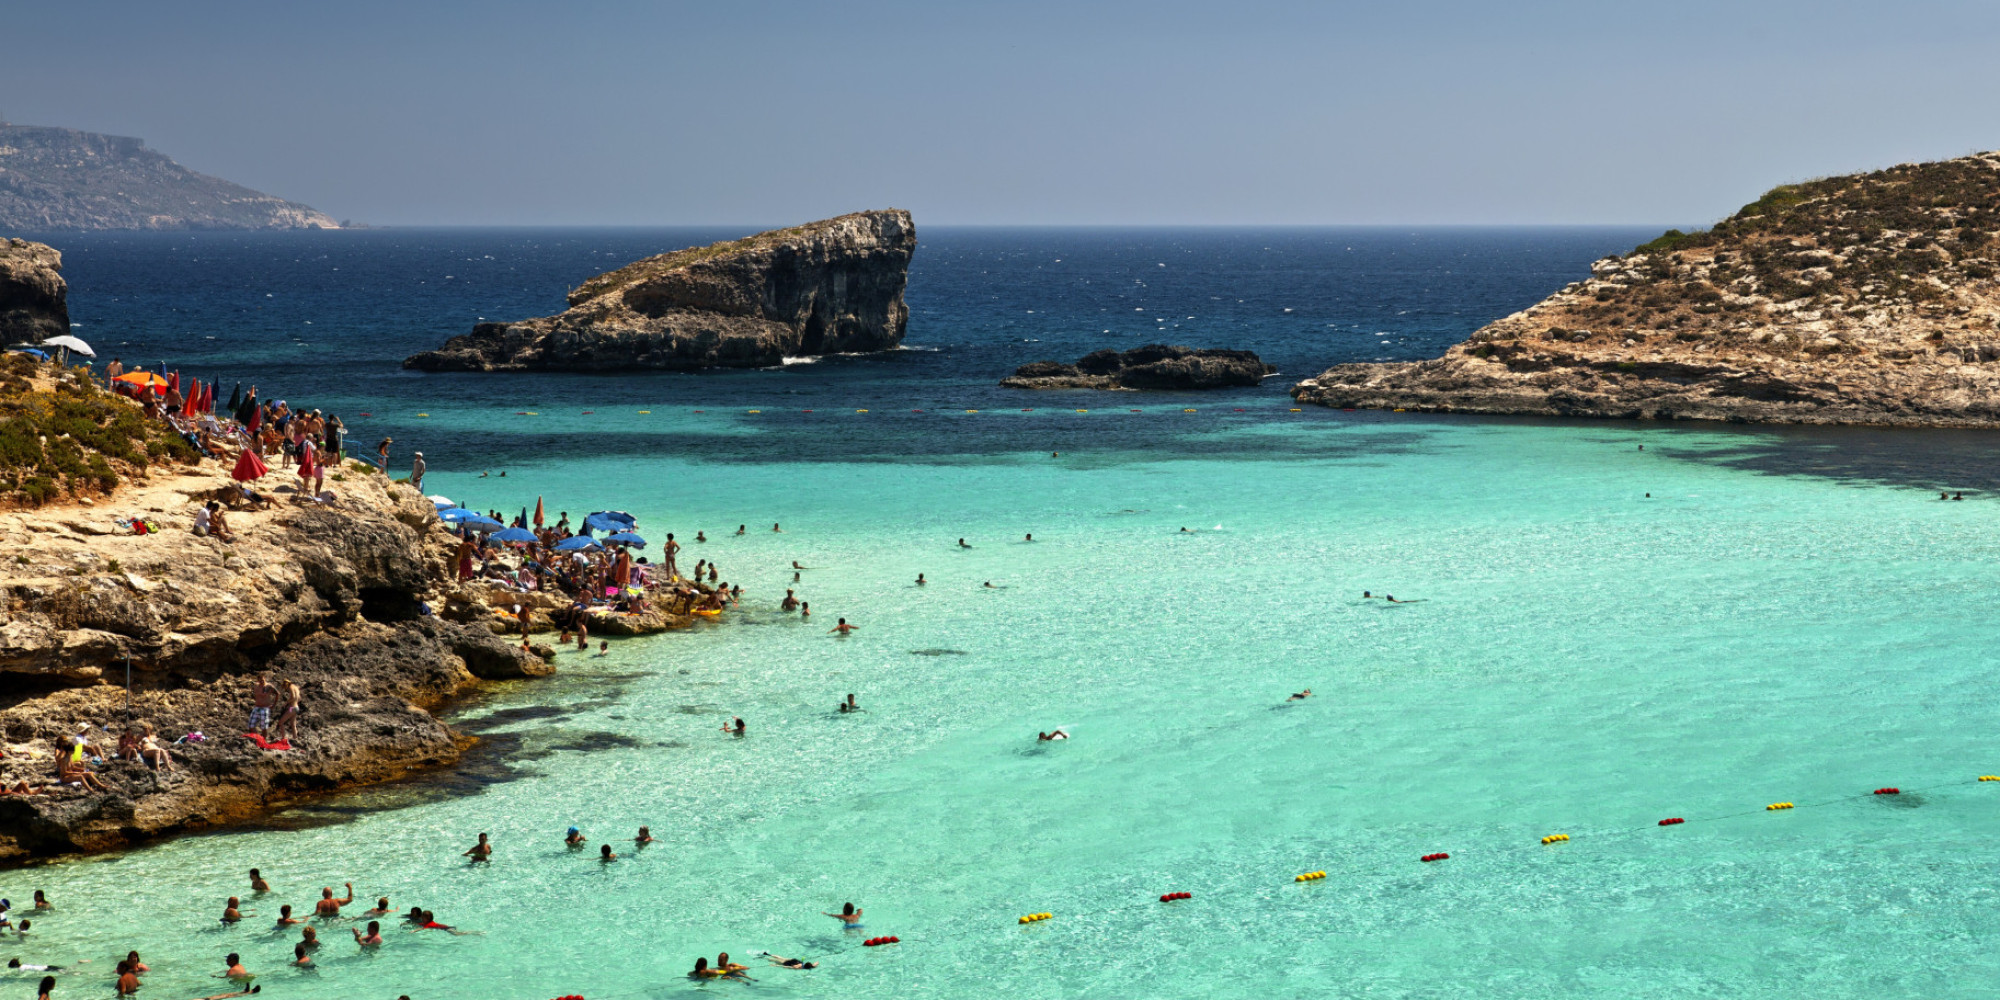 Comino Island In Malta Has A Blue Lagoon, And It's Kind Of Heaven